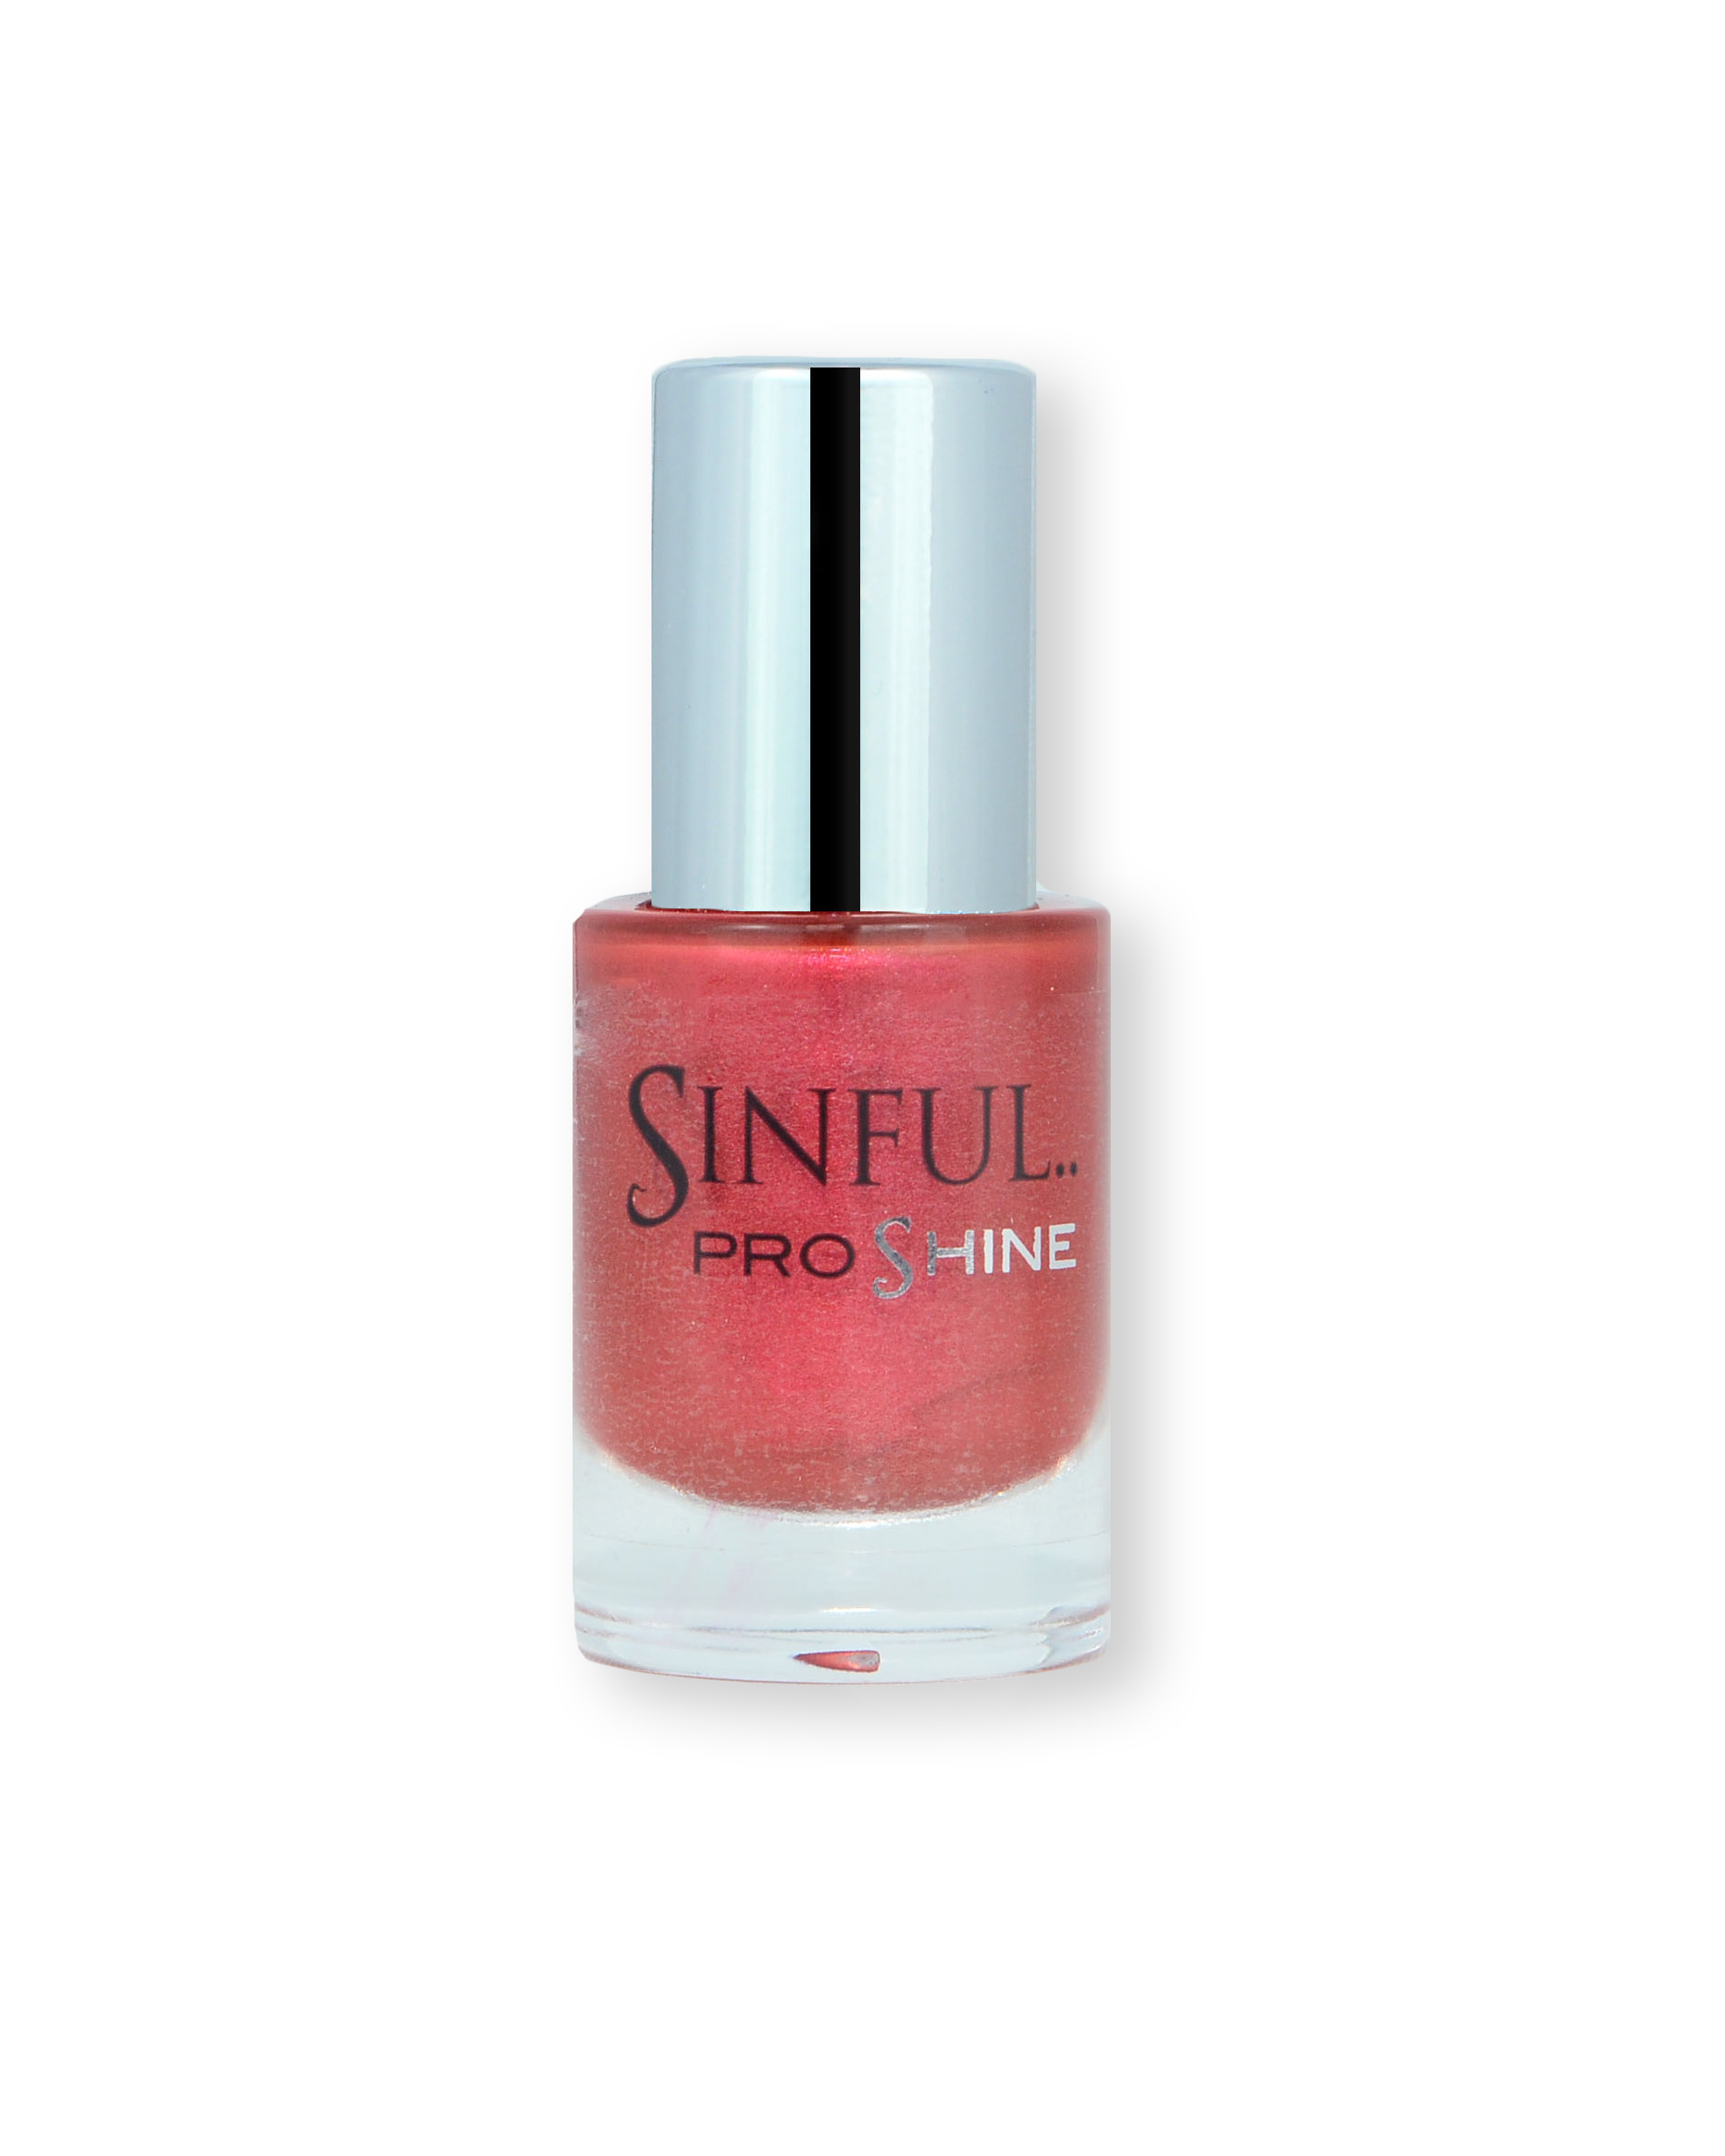 Sinful PROshine is a revolution into top spec imitation gel-like formula, easy application, full coverage and a sleek finish. Spoil yourself with the choice of 42 shades, expertly formulated with the finest grade of pigments. Ruthless: Ruby red with a gentle pearlescent finish